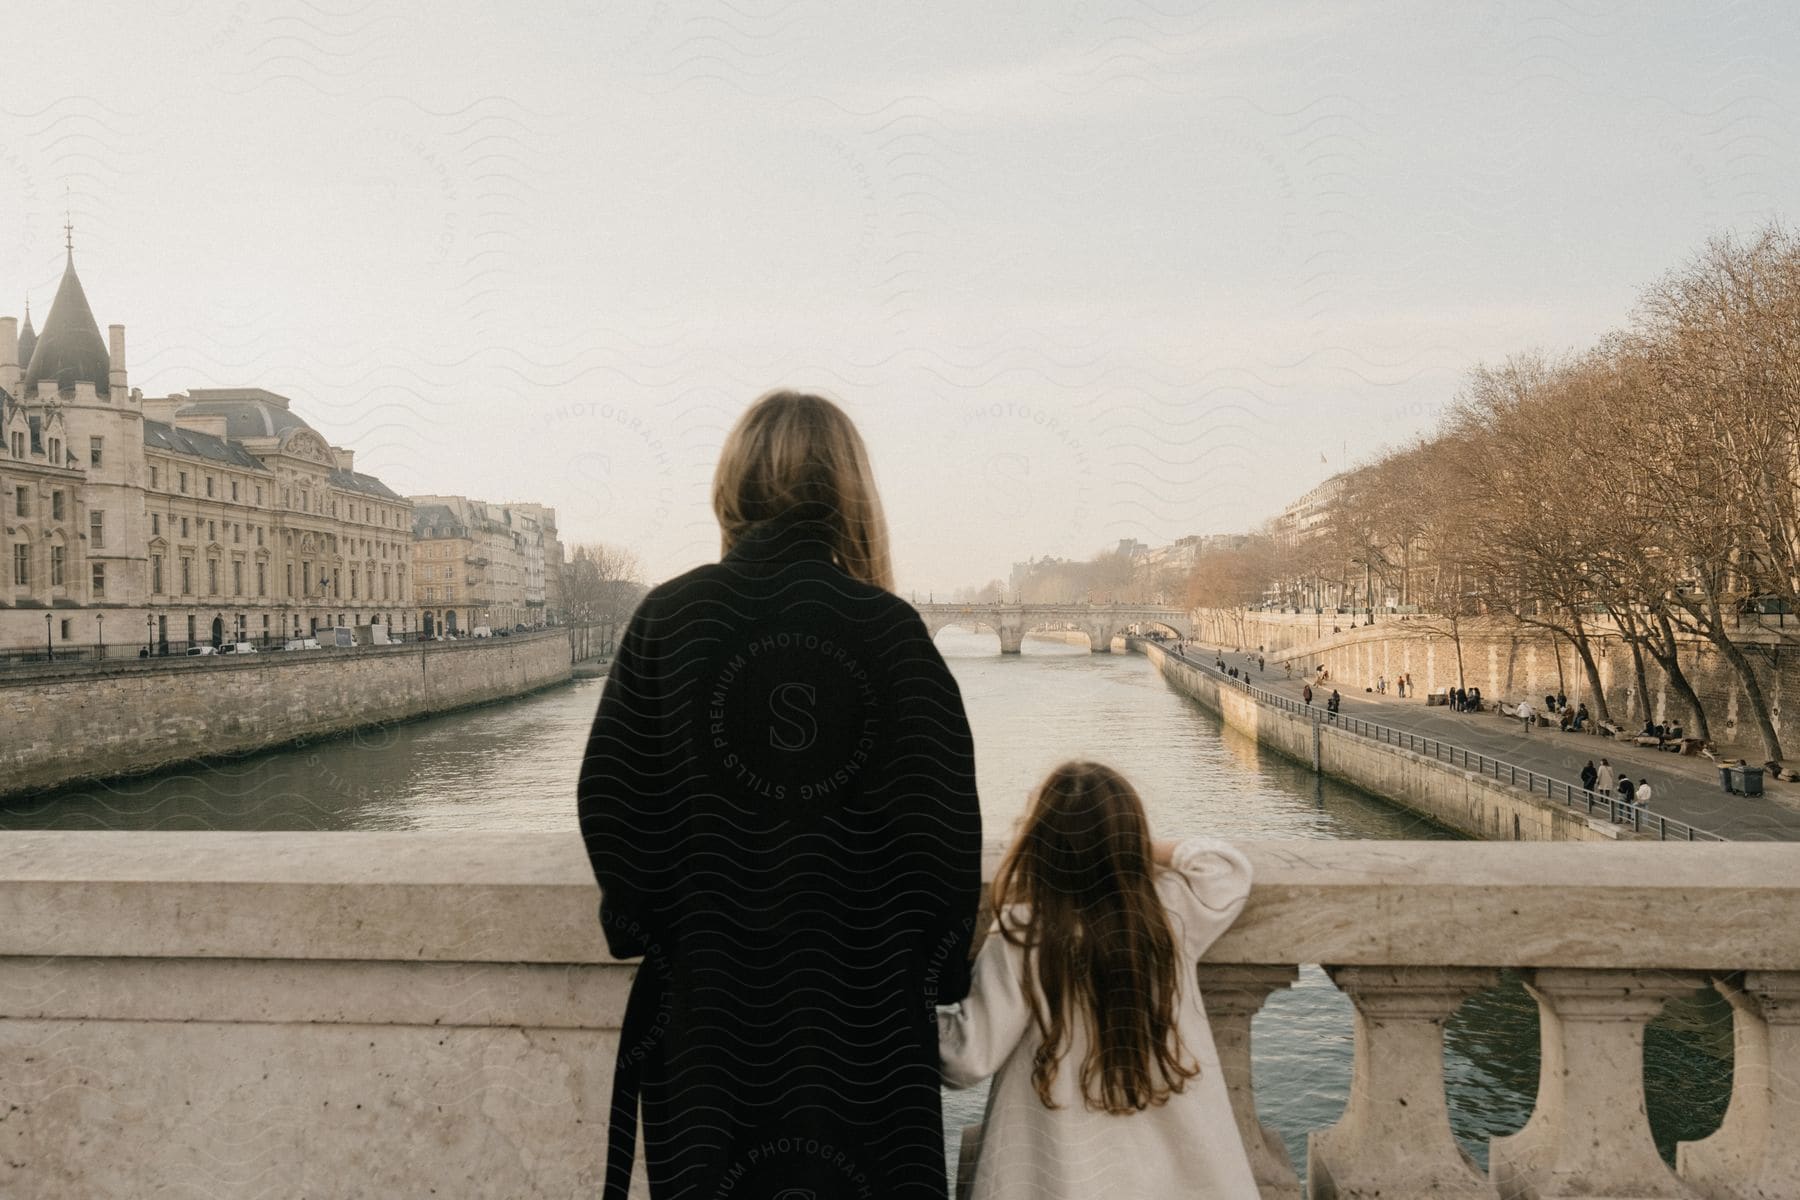 A mother and daughter stand on a bridge overlooking a canal in paris